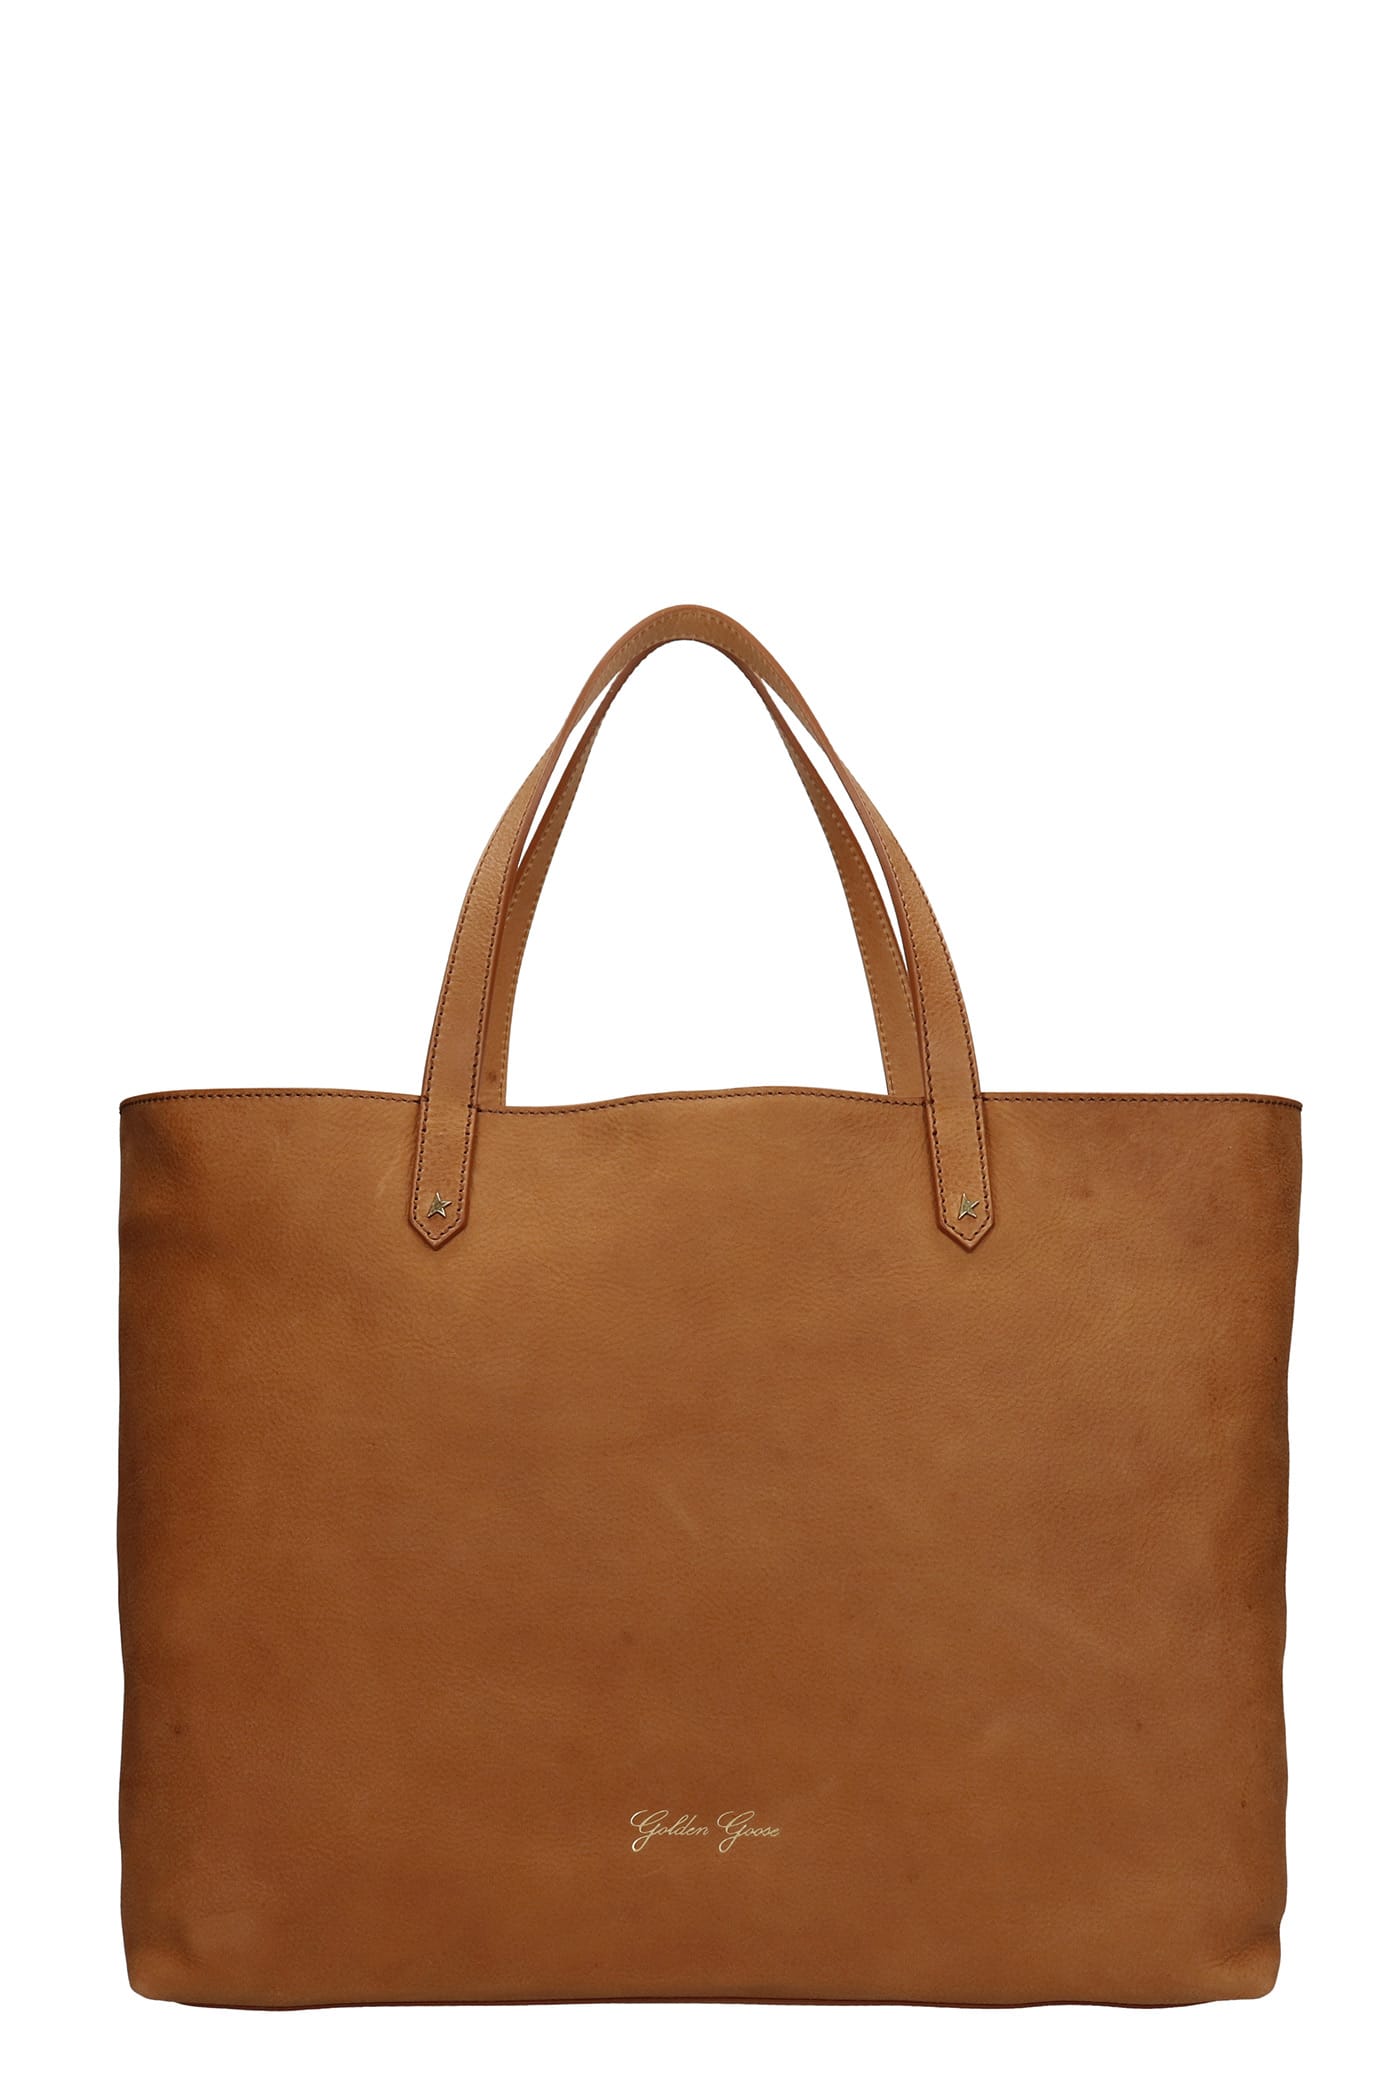 Golden Goose Golden Pasadena Tote In Leather Color Leather